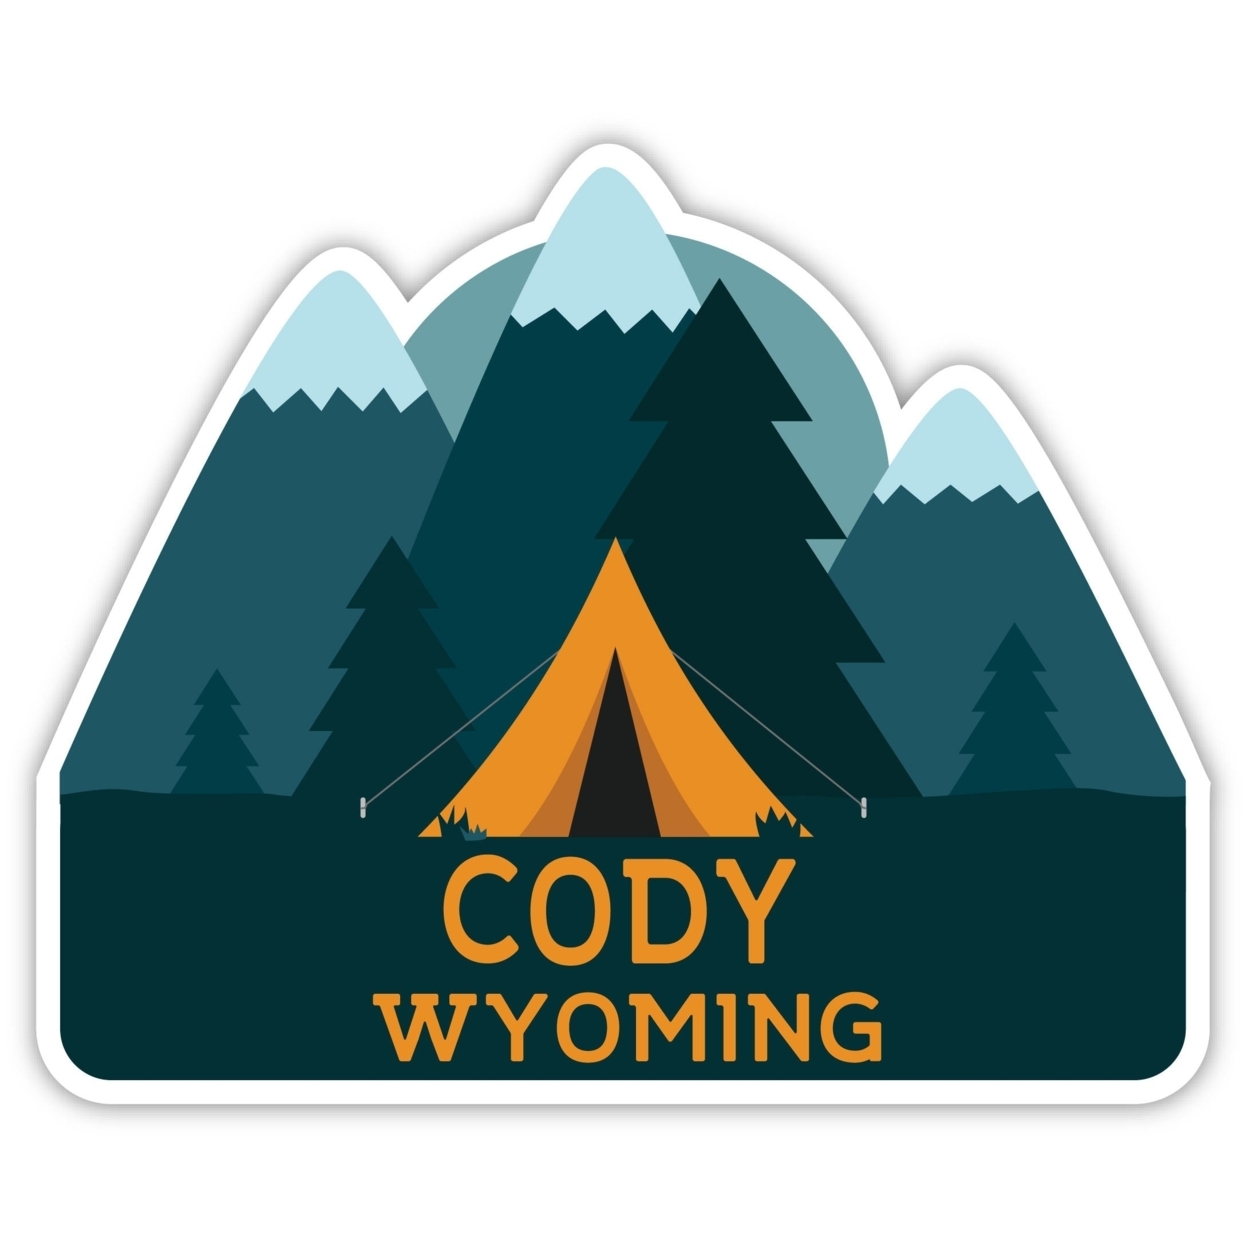 Cody Wyoming Souvenir Decorative Stickers (Choose Theme And Size) - Single Unit, 2-Inch, Adventures Awaits